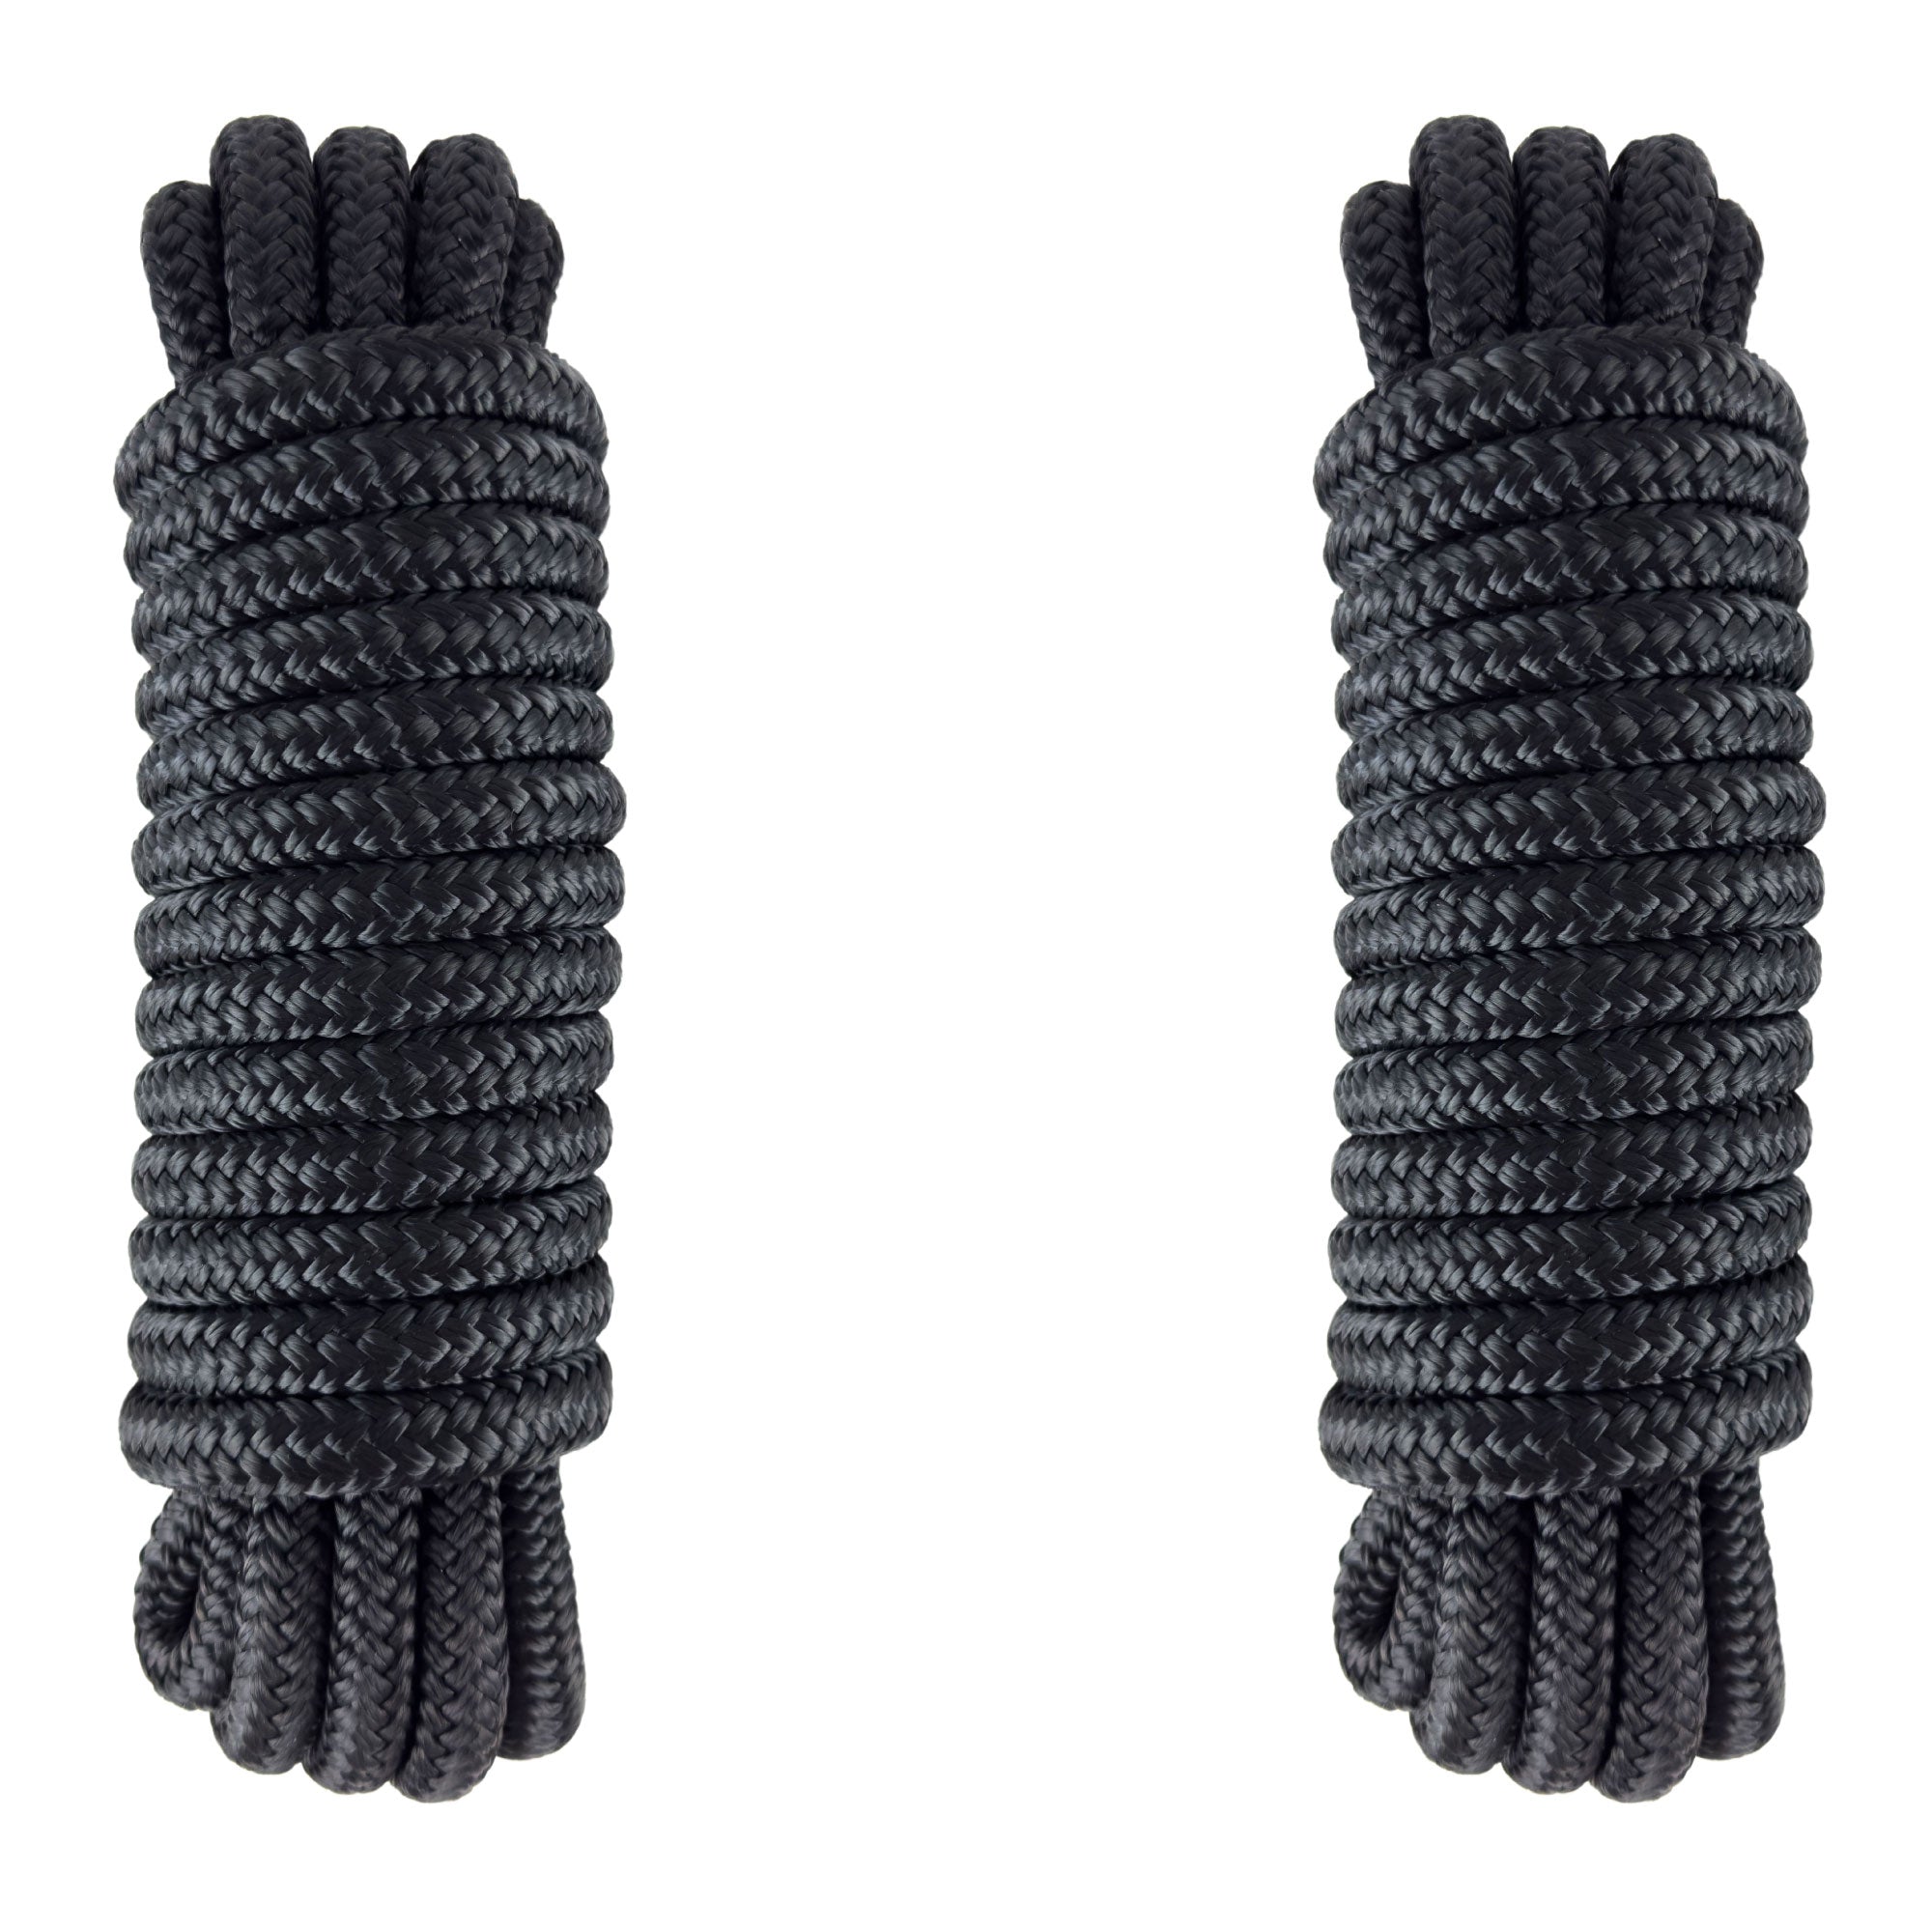 Dock Lines, 1/2" x 20', Black Nylon Double Braided with 12" Eyelet, 2-Pack - FO4451-M2